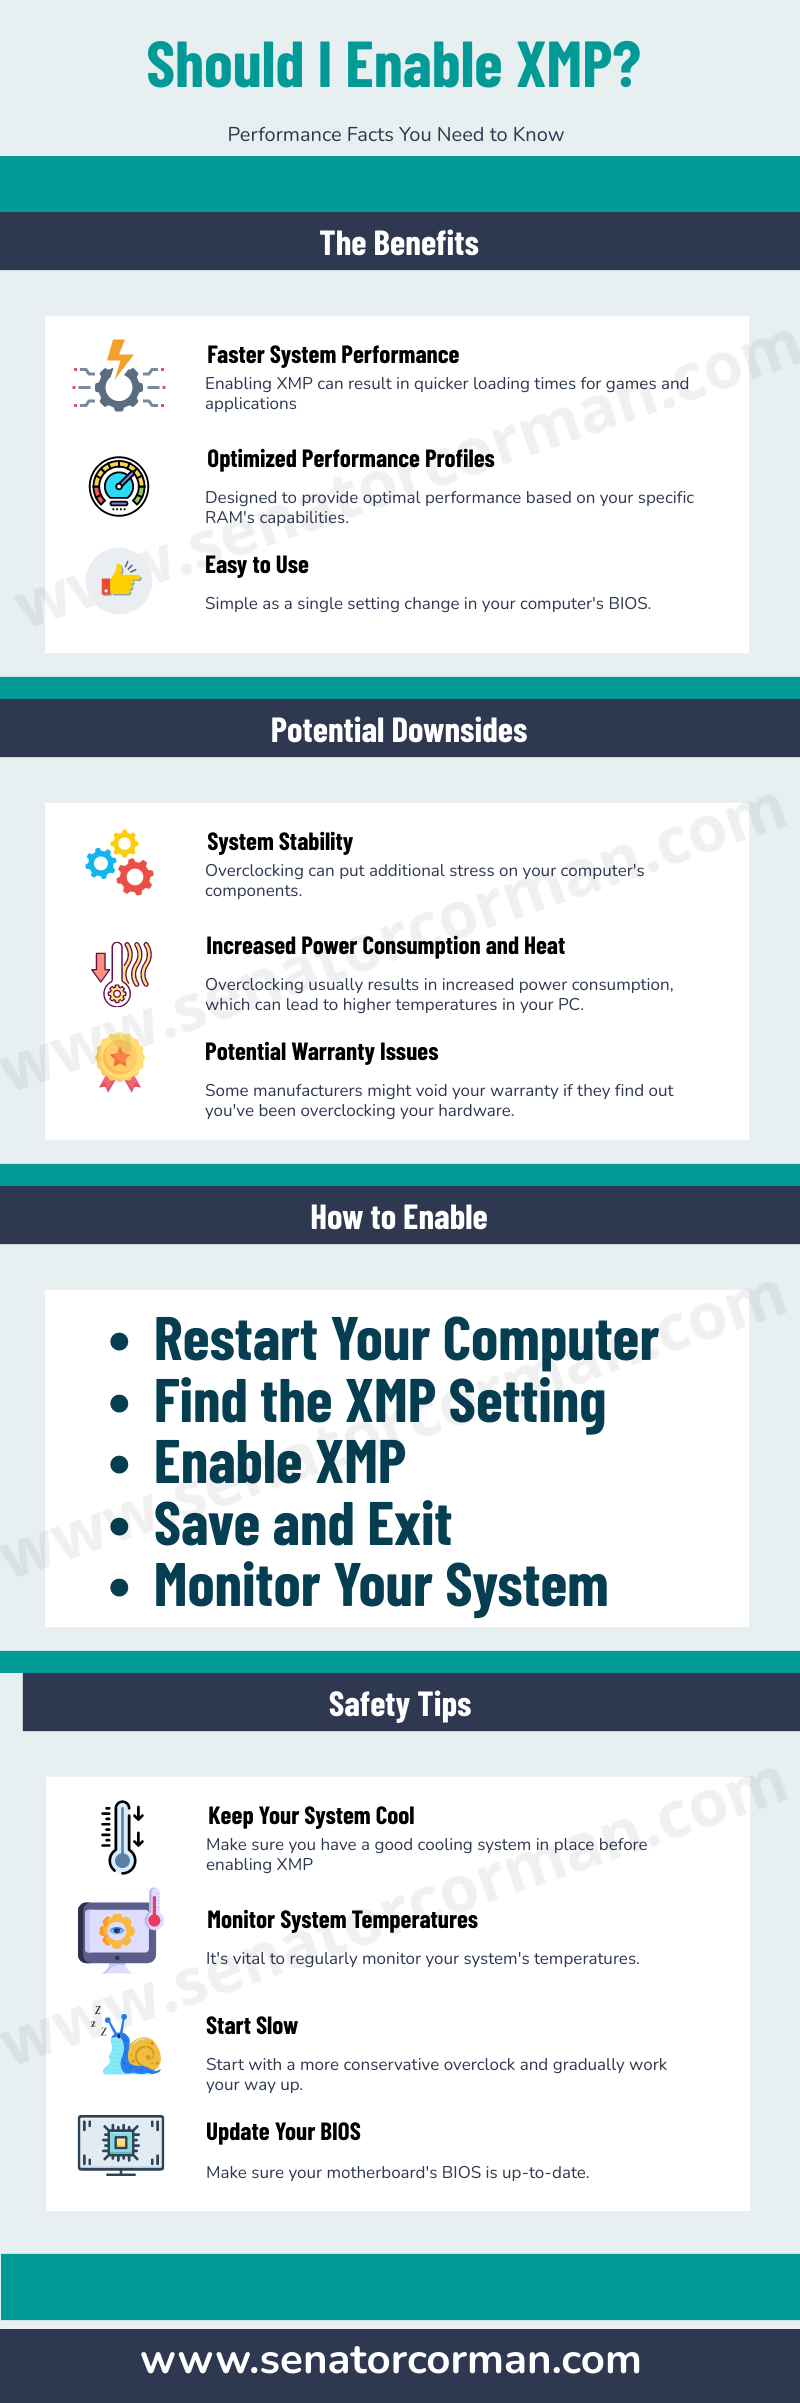 This infographic show some fact you need to know if enable XMP